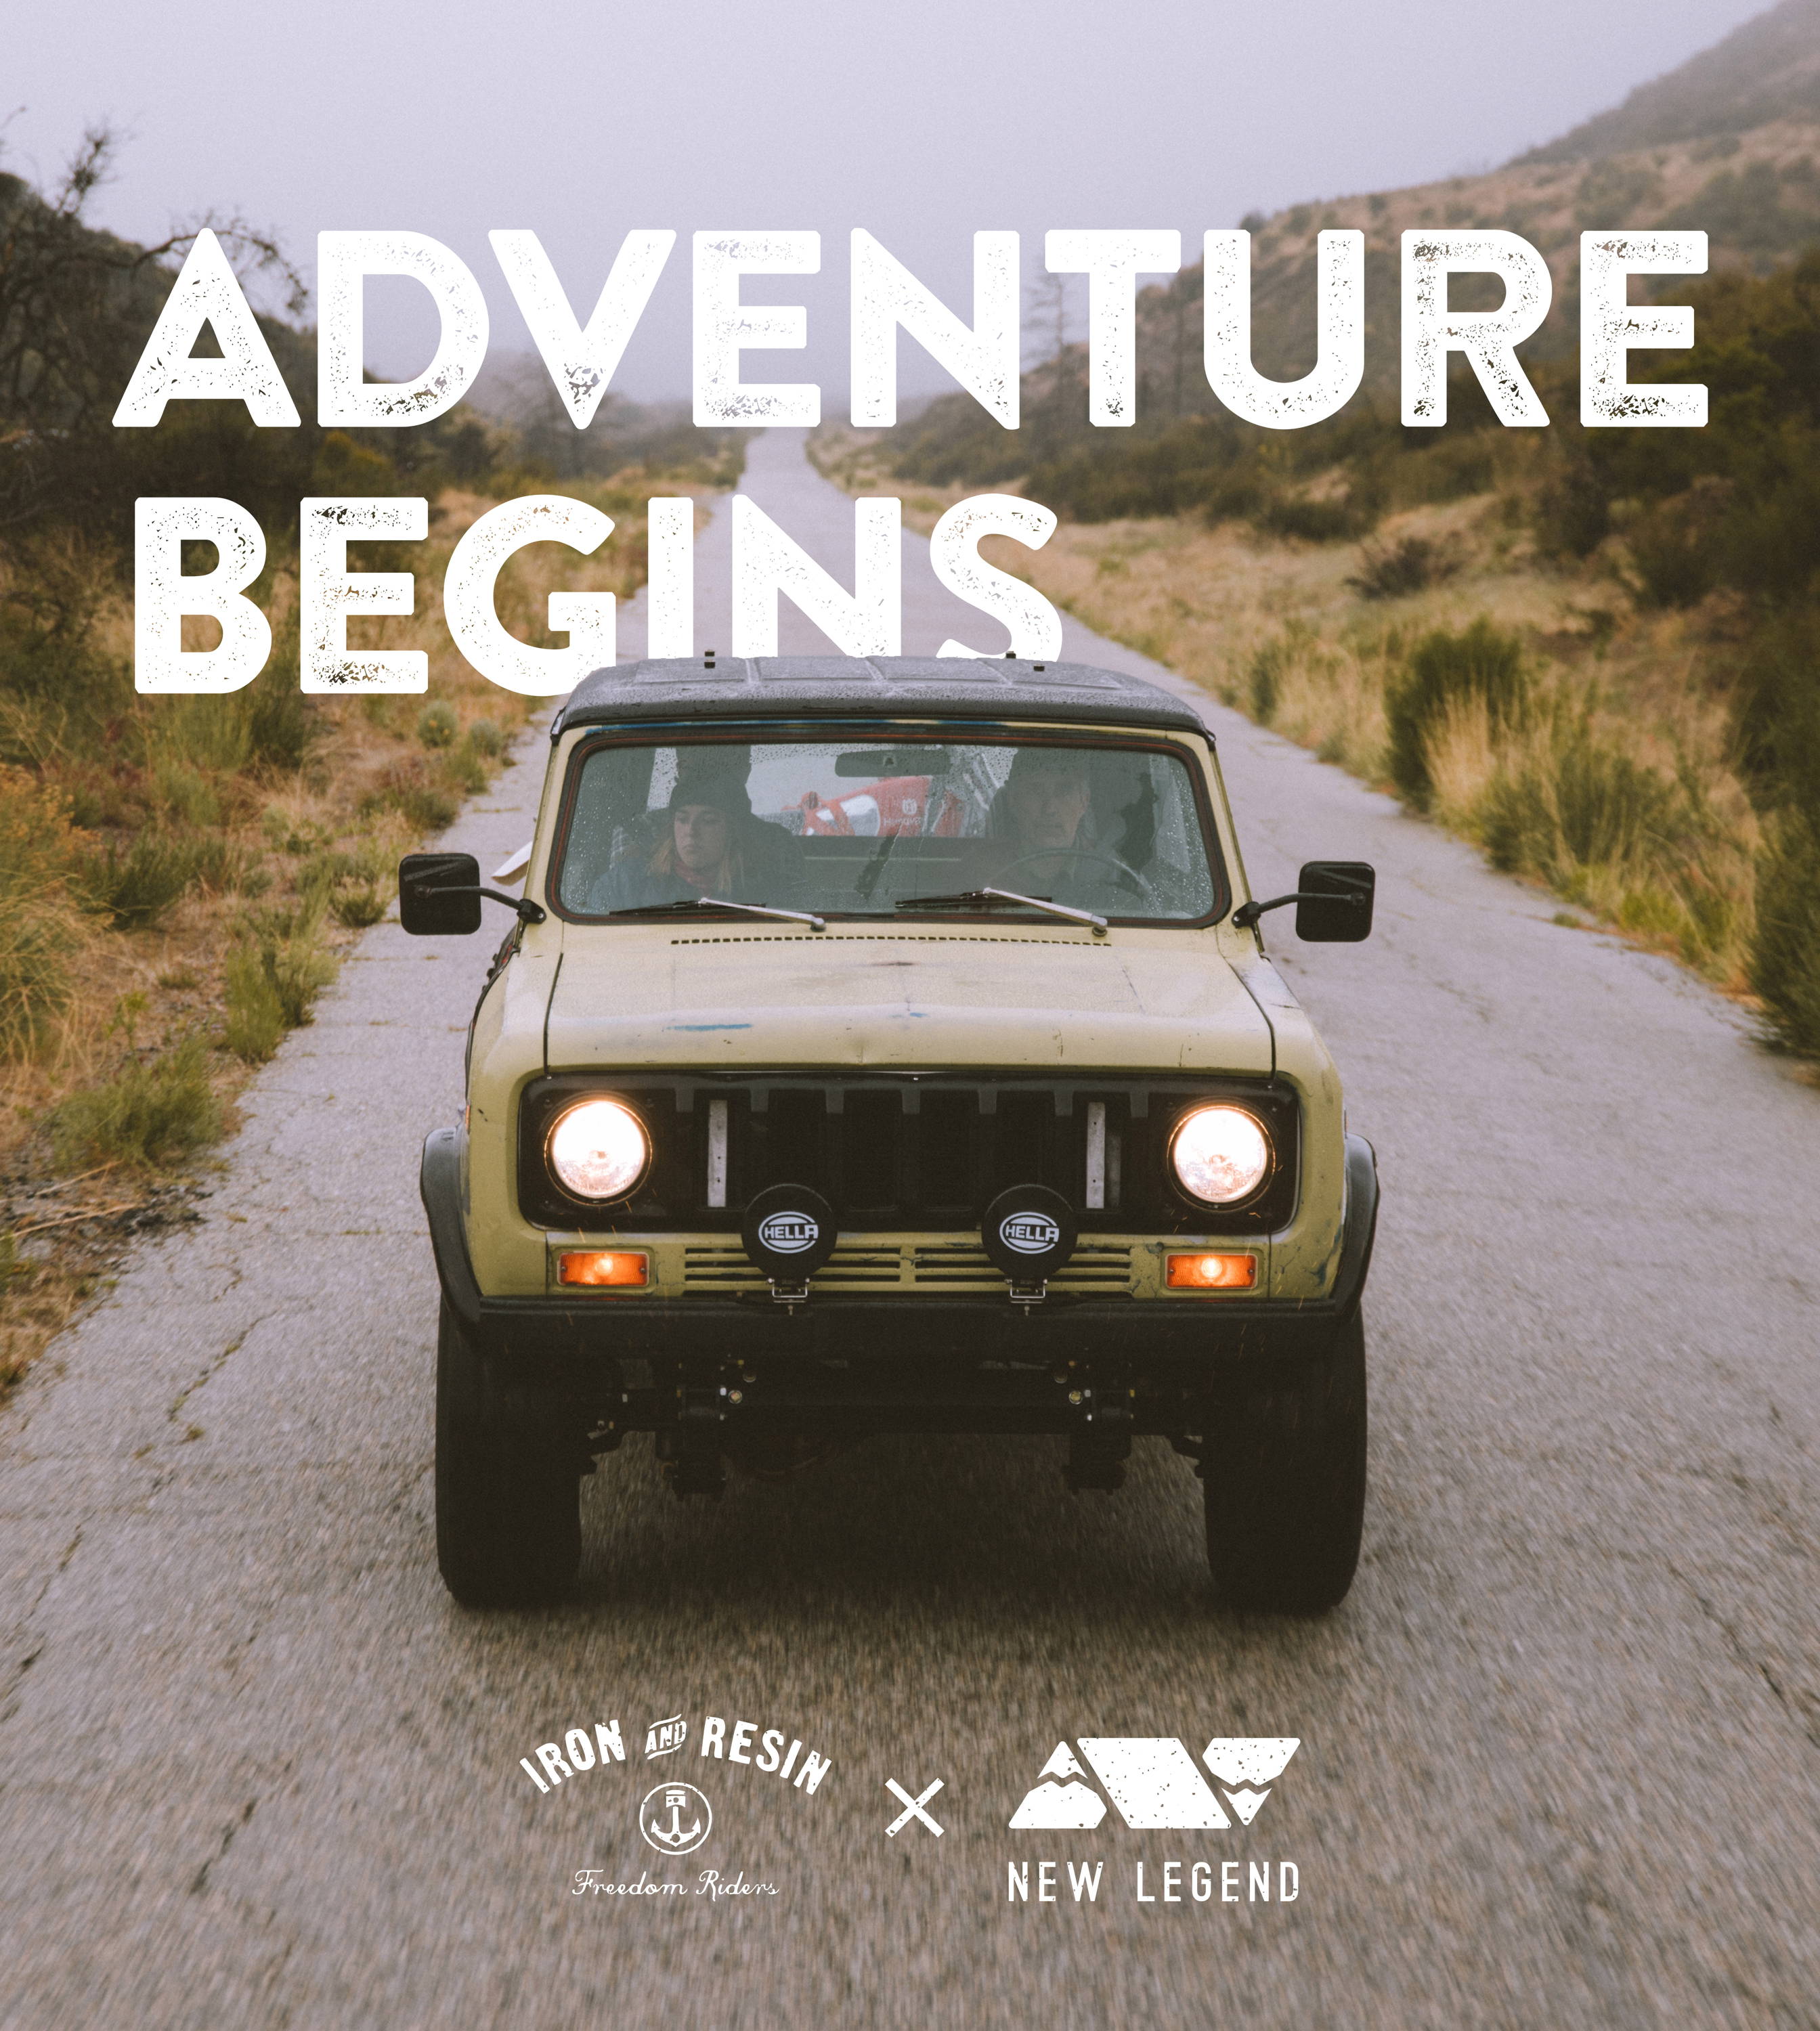 Adventure Begins Collaboration with Iron & Resin and New Legend 4x4